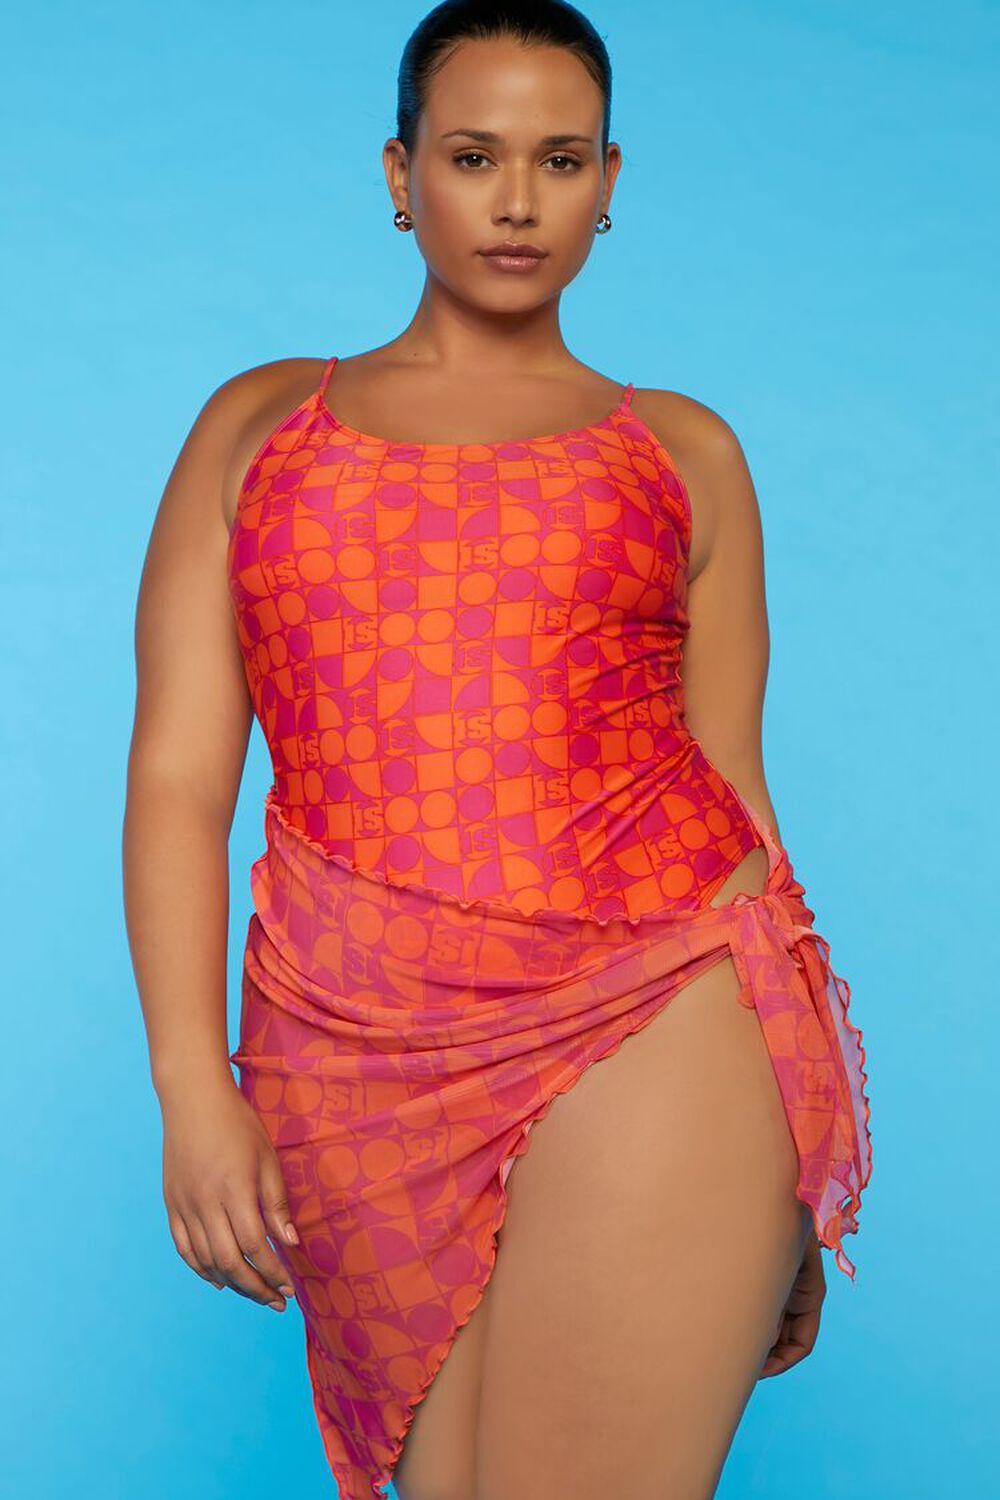 Transistor Spis aftensmad Parametre Plus Size Sports Illustrated Swim Cover-Up Sarong